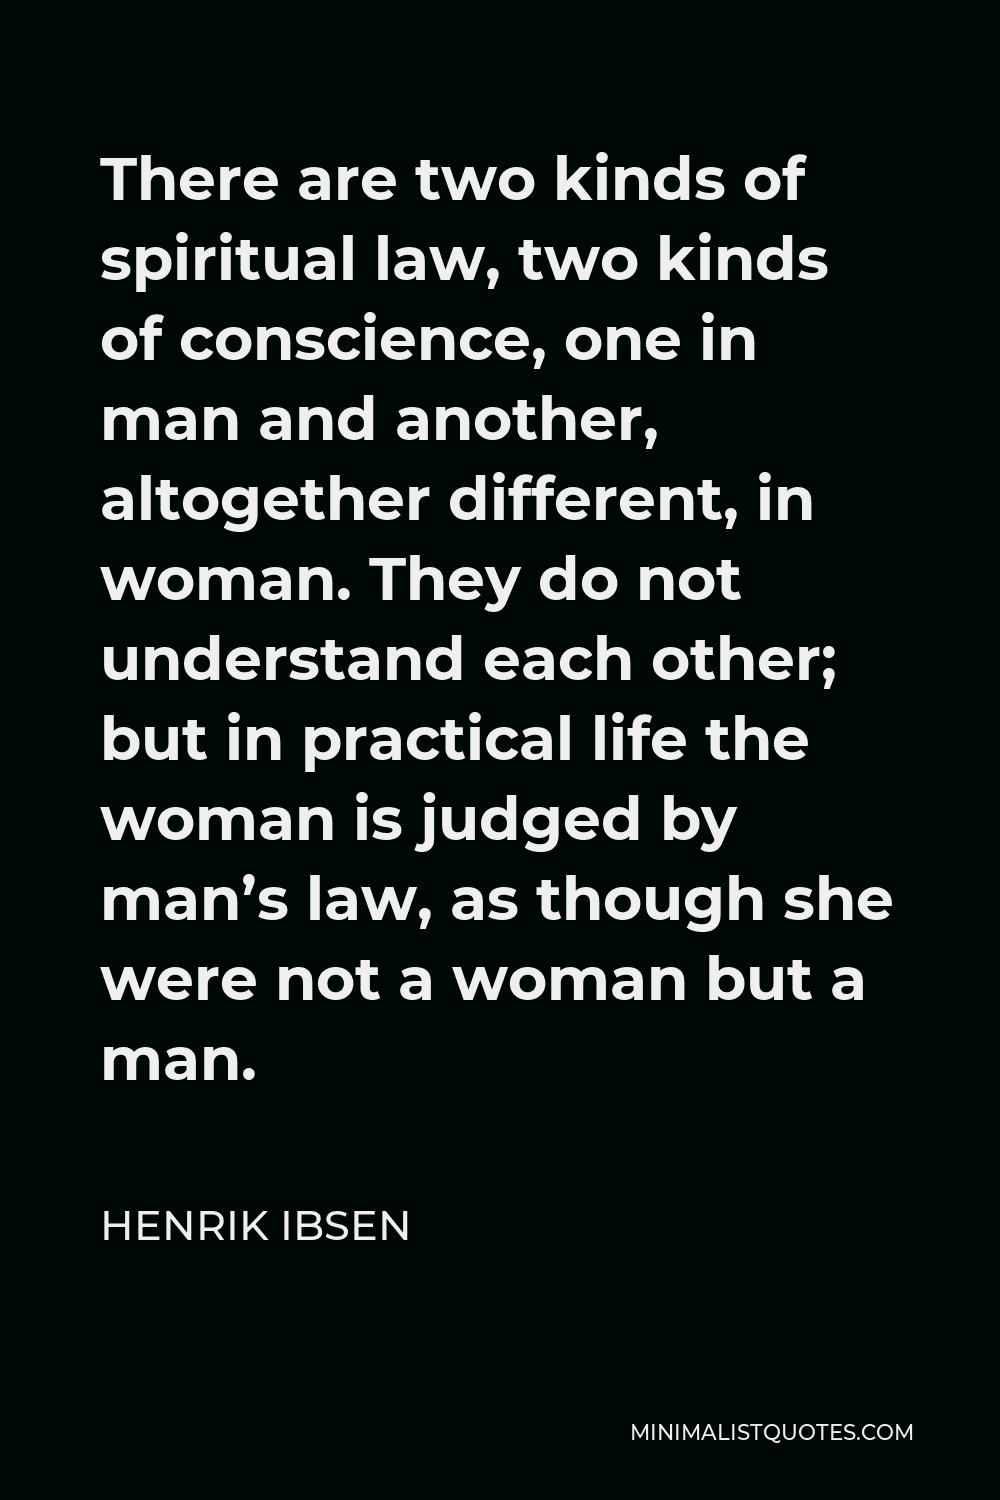 Henrik Ibsen Quote - There are two kinds of spiritual law, two kinds of conscience, one in man and another, altogether different, in woman. They do not understand each other; but in practical life the woman is judged by man’s law, as though she were not a woman but a man.